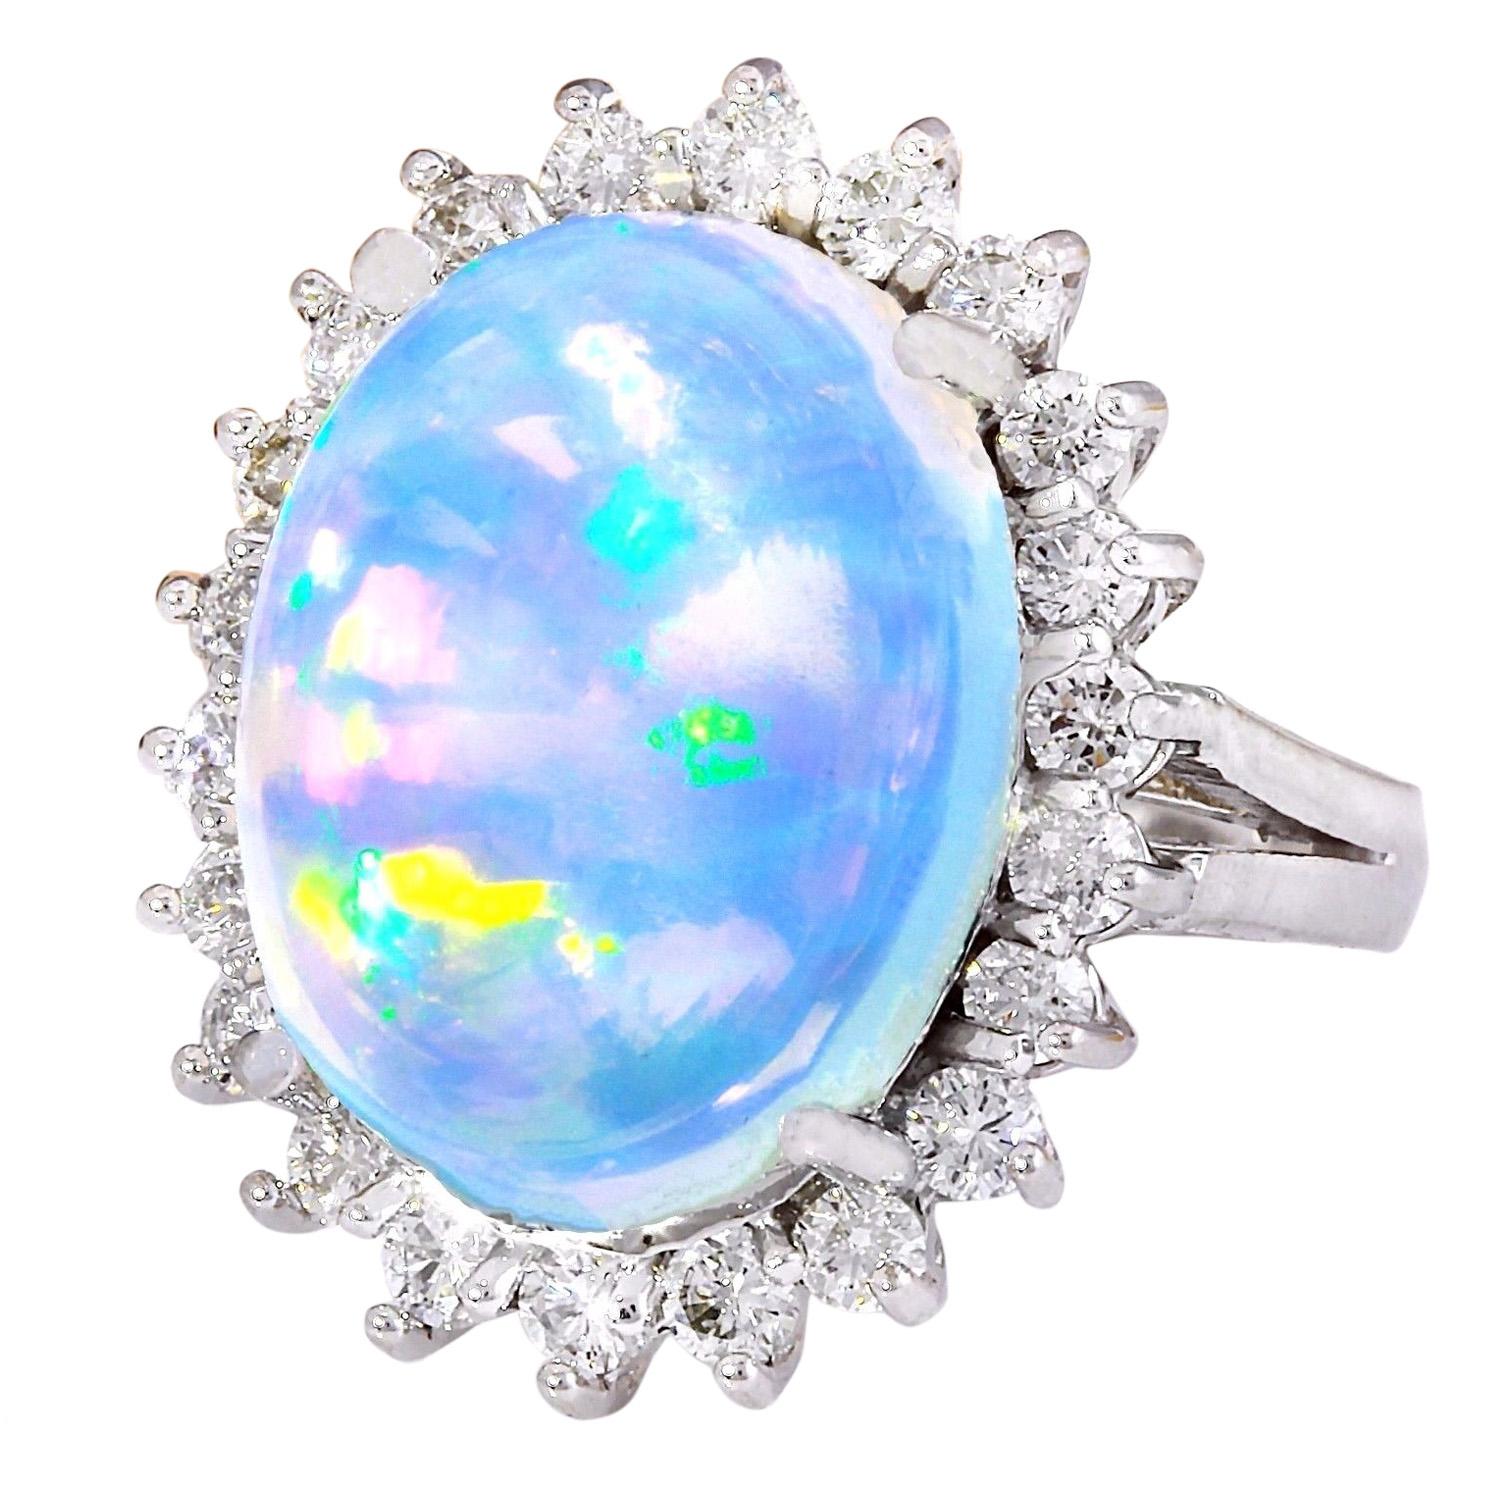 9.53 Carat Natural Opal 14K Solid White Gold Diamond Ring
 Item Type: Ring
 Item Style: Cocktail
 Material: 14K White Gold
 Mainstone: Opal
 Stone Color: Multicolor
 Stone Weight: 8.53 Carat
 Stone Shape: Oval
 Stone Quantity: 1
 Stone Dimensions: